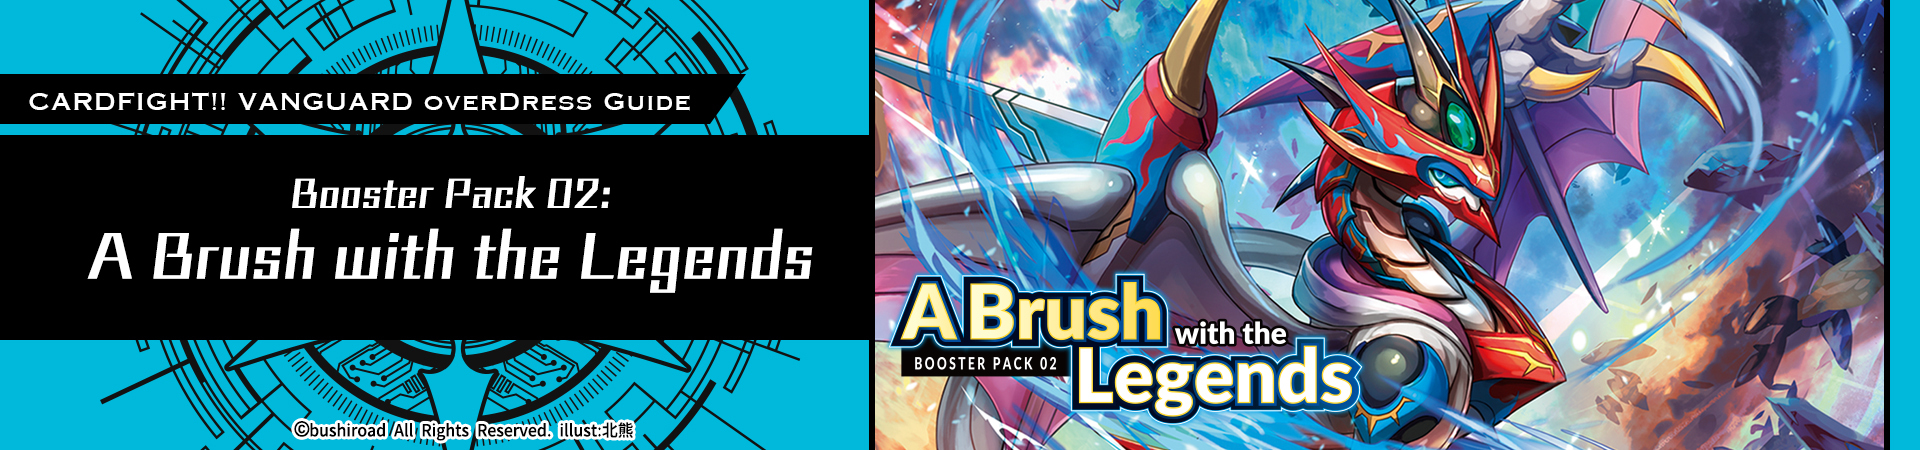 D Booster Pack 02: A Brush with the Legends (Official Guide 